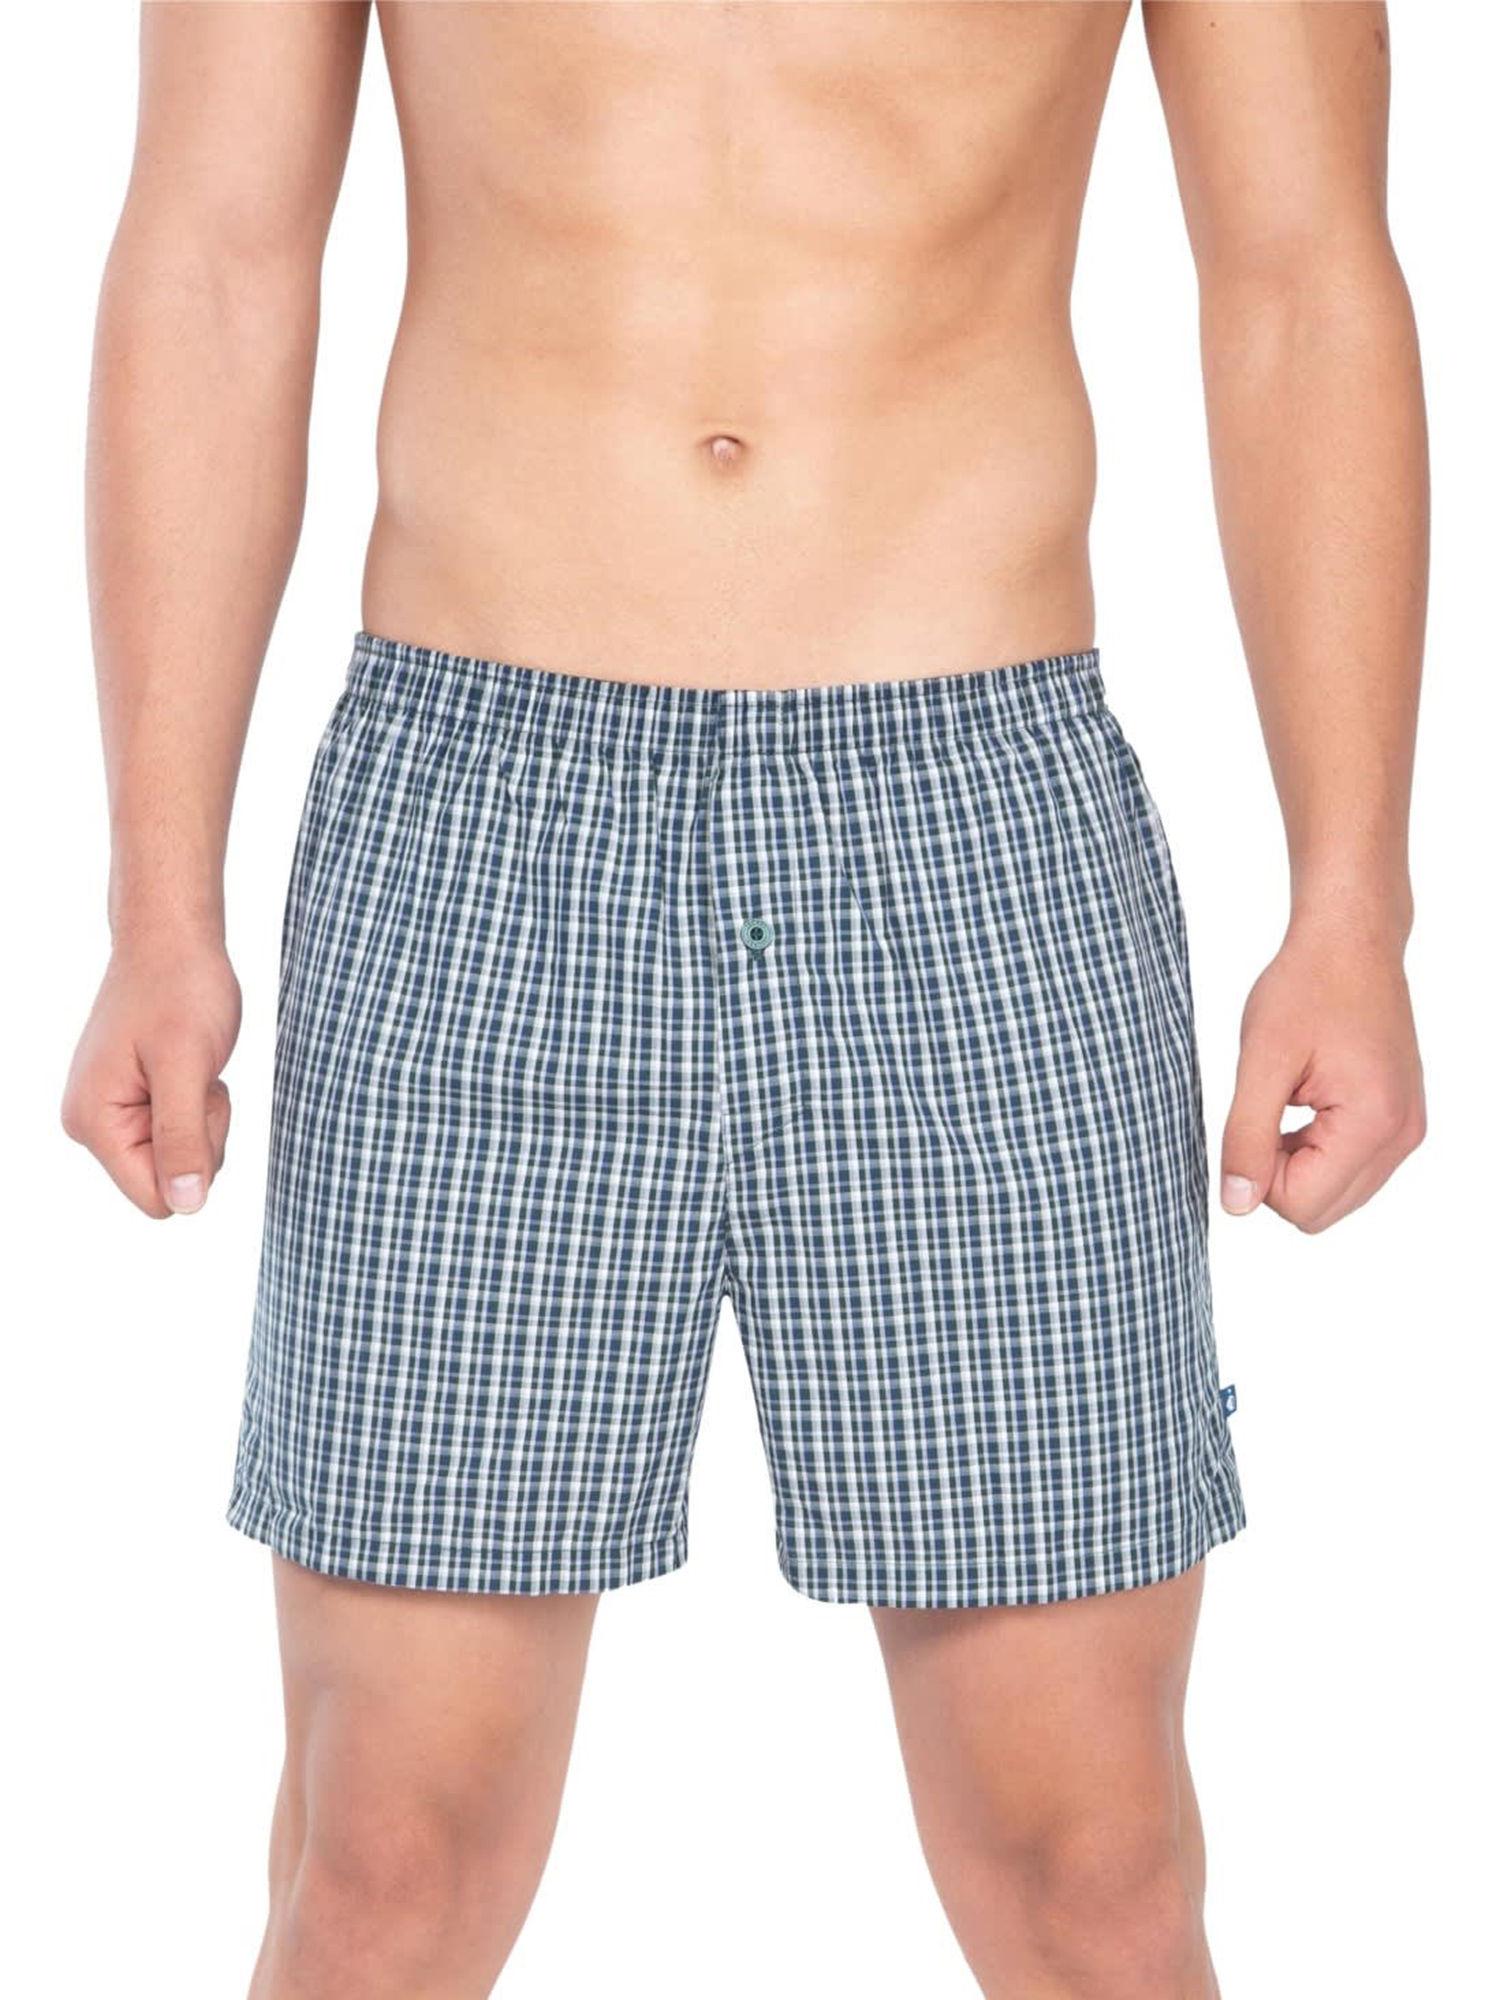 Bottle Green & Check11 Boxer Shorts Pack of 2